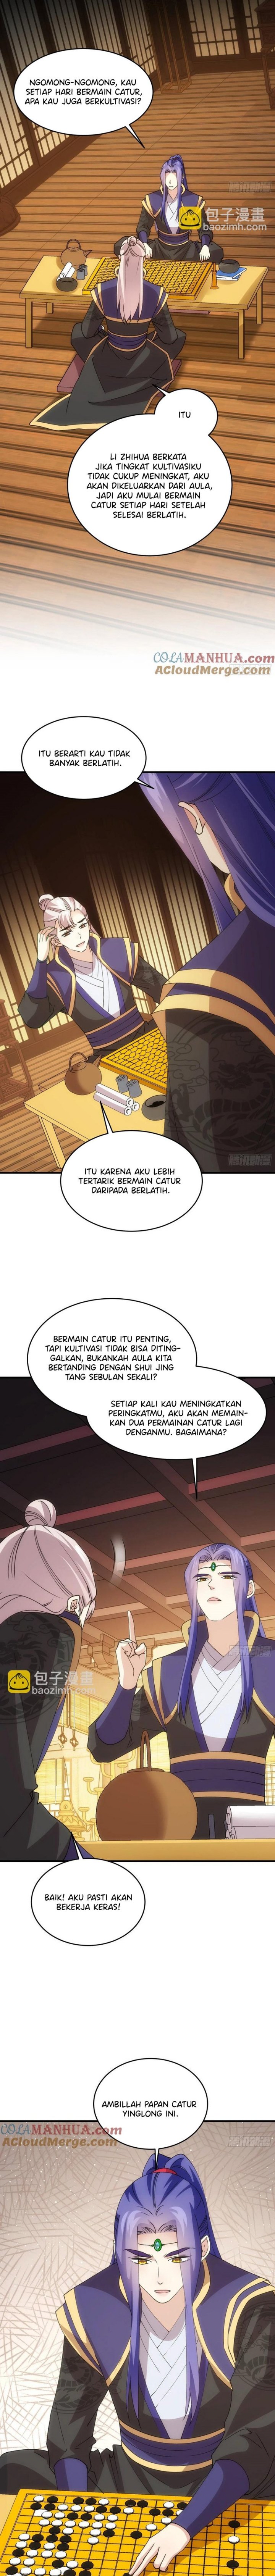 Dilarang COPAS - situs resmi www.mangacanblog.com - Komik i just dont play the card according to the routine 201 - chapter 201 202 Indonesia i just dont play the card according to the routine 201 - chapter 201 Terbaru 9|Baca Manga Komik Indonesia|Mangacan